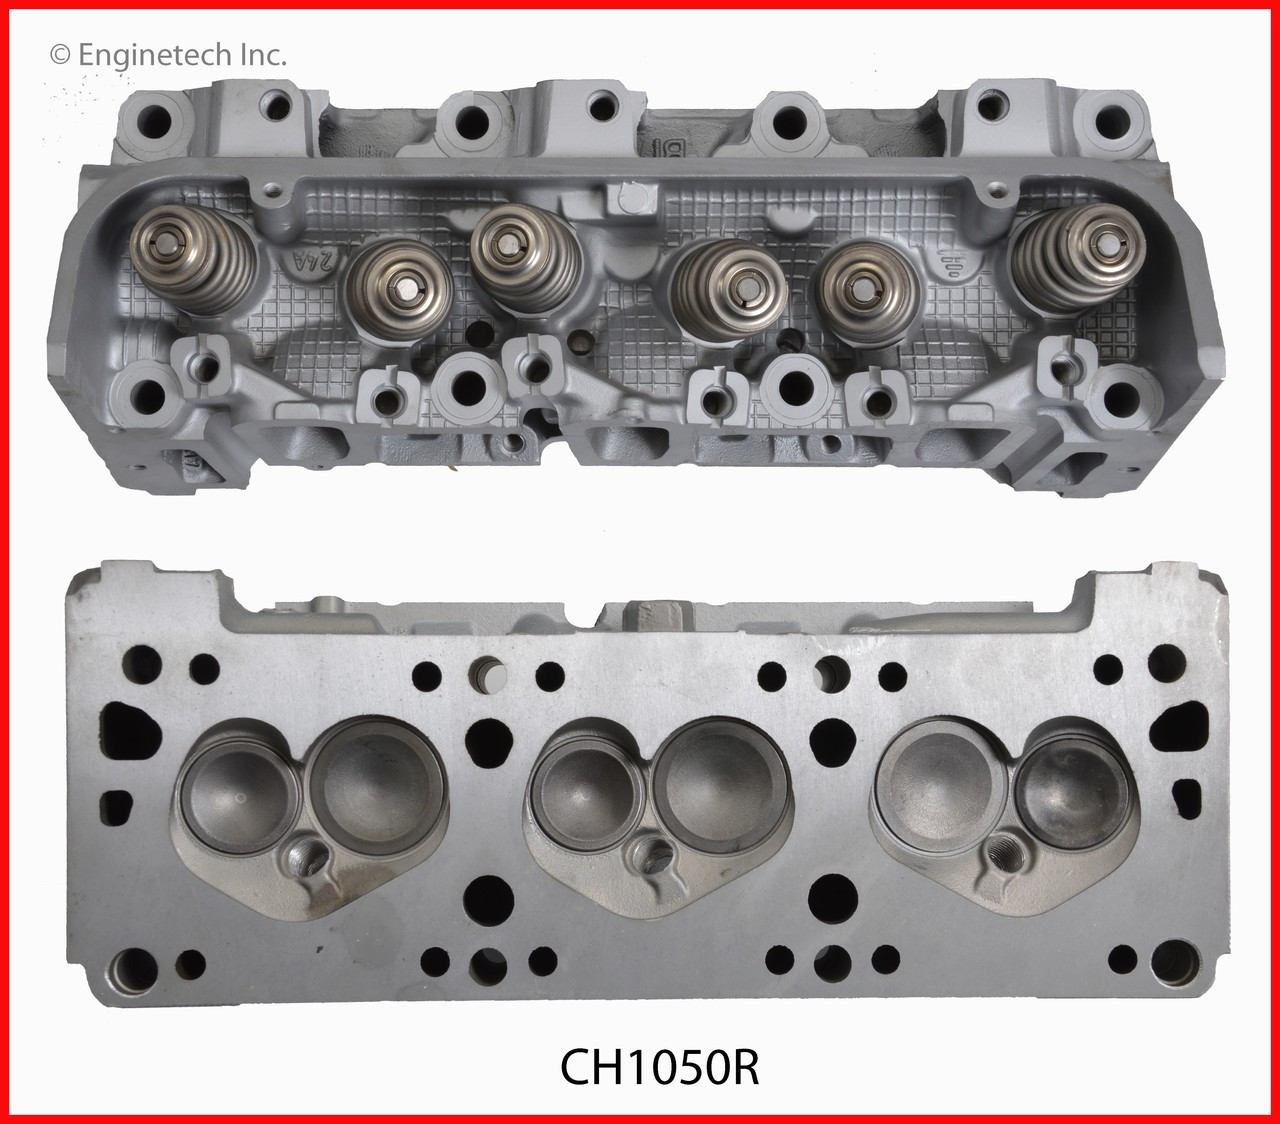 1997 Chevrolet Monte Carlo 3.1L Engine Cylinder Head Assembly CH1050R -17